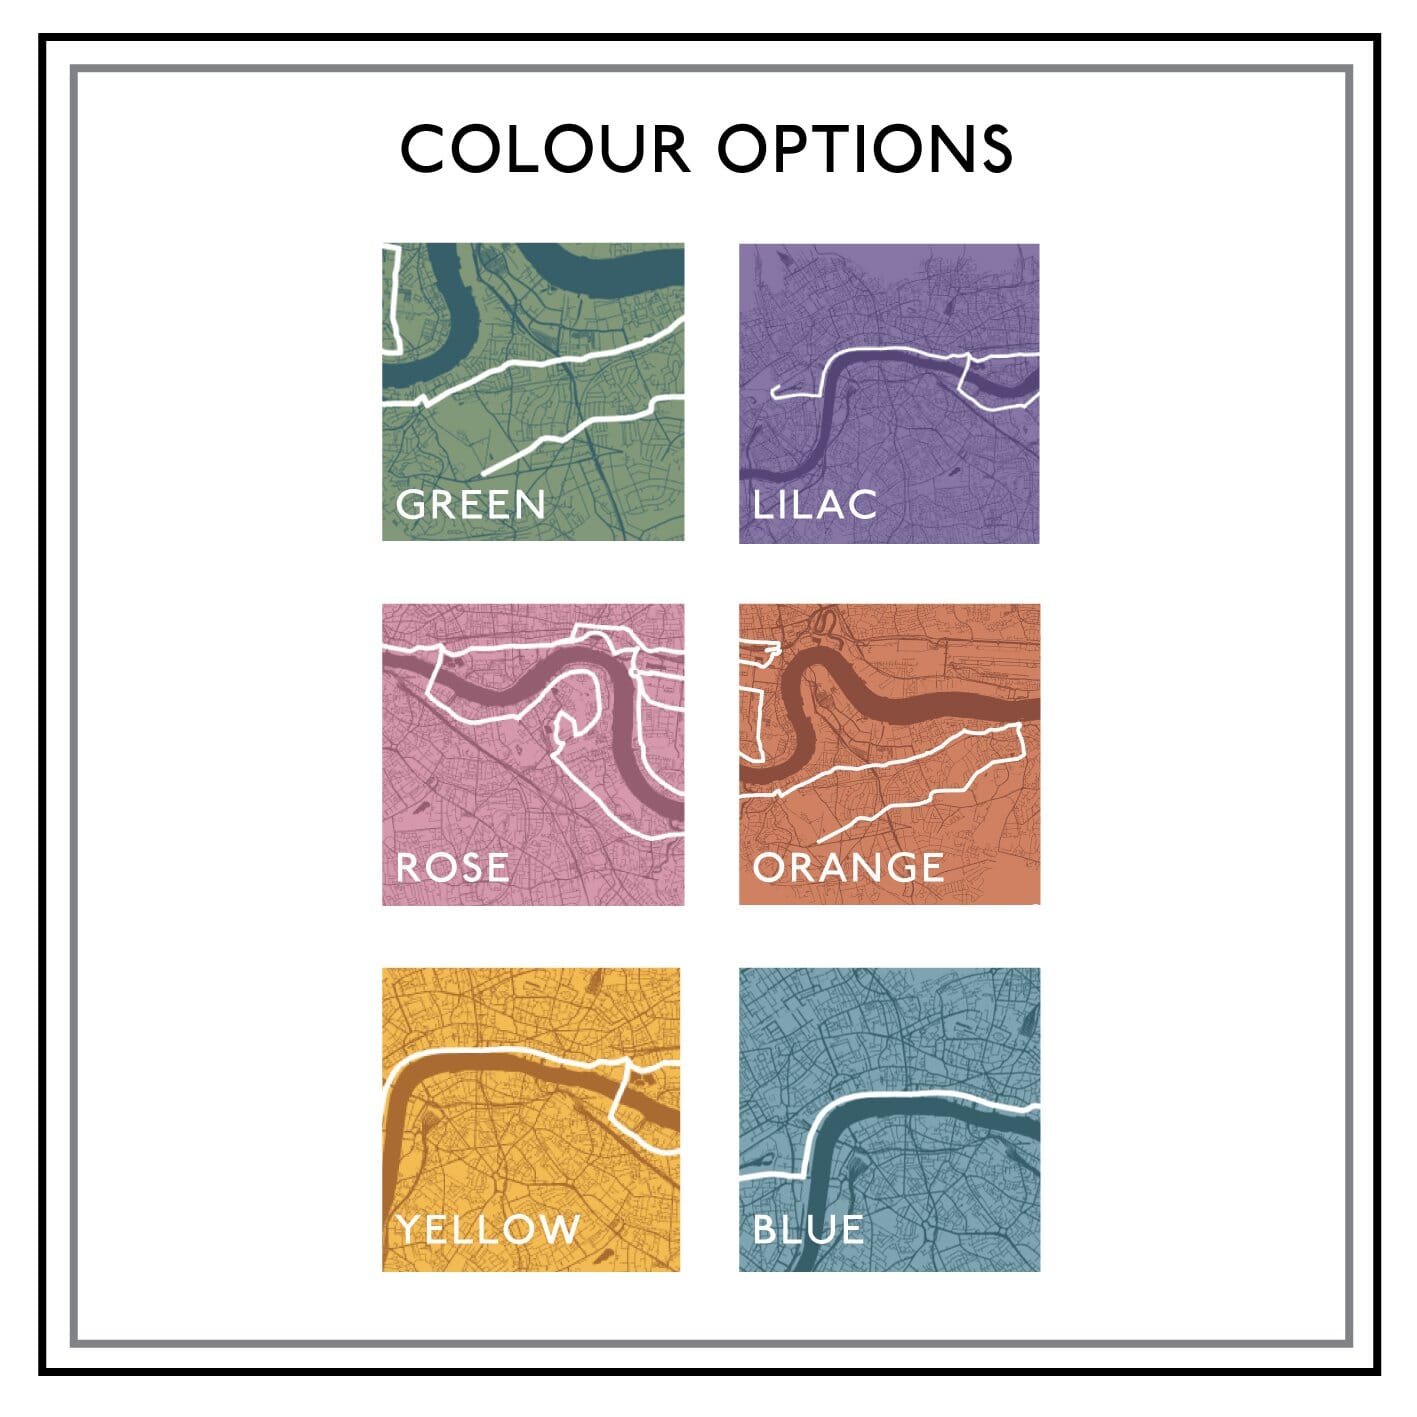 Colour option chart for the print